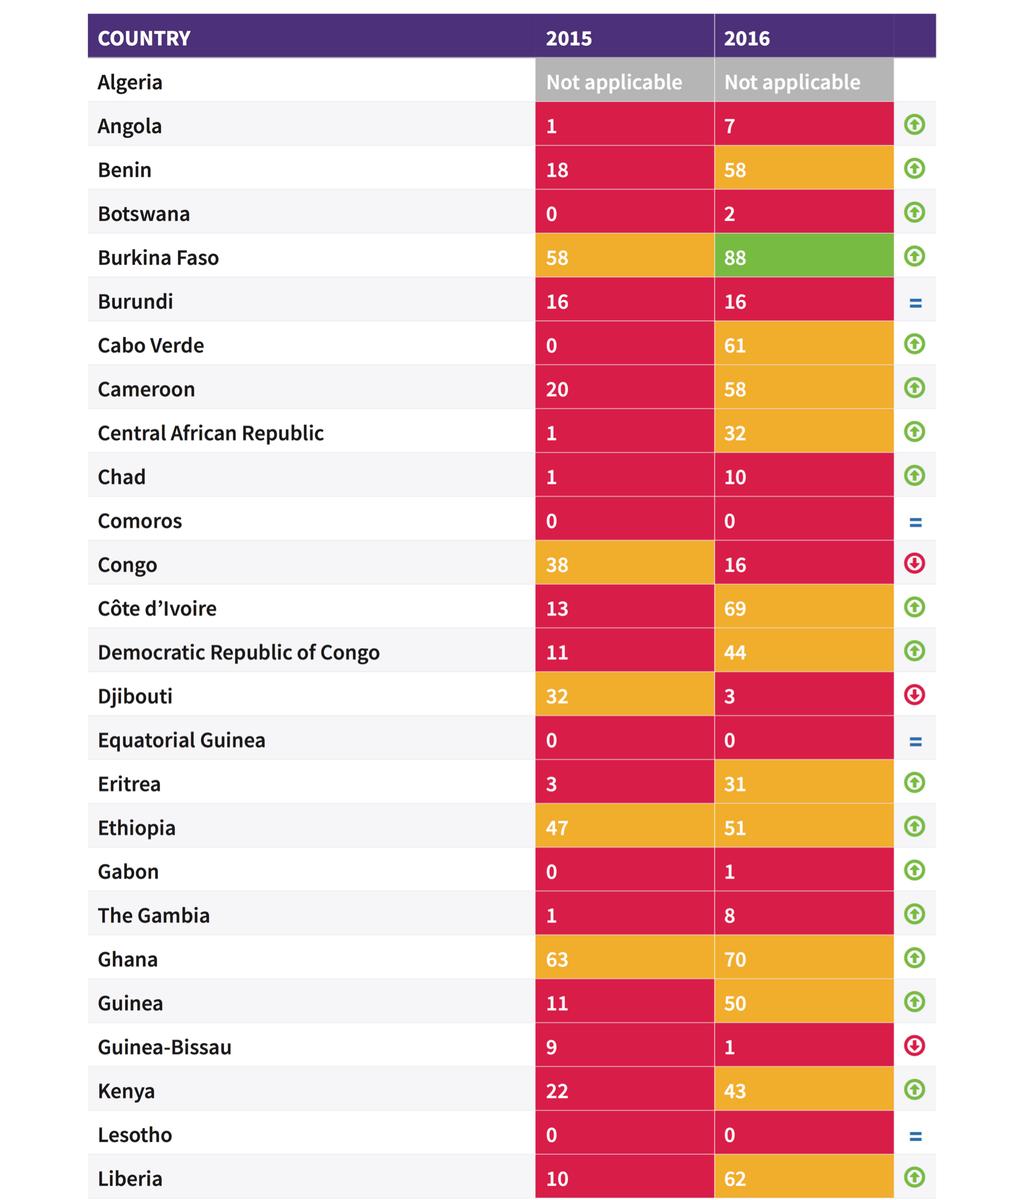 Country index 6 Togo and